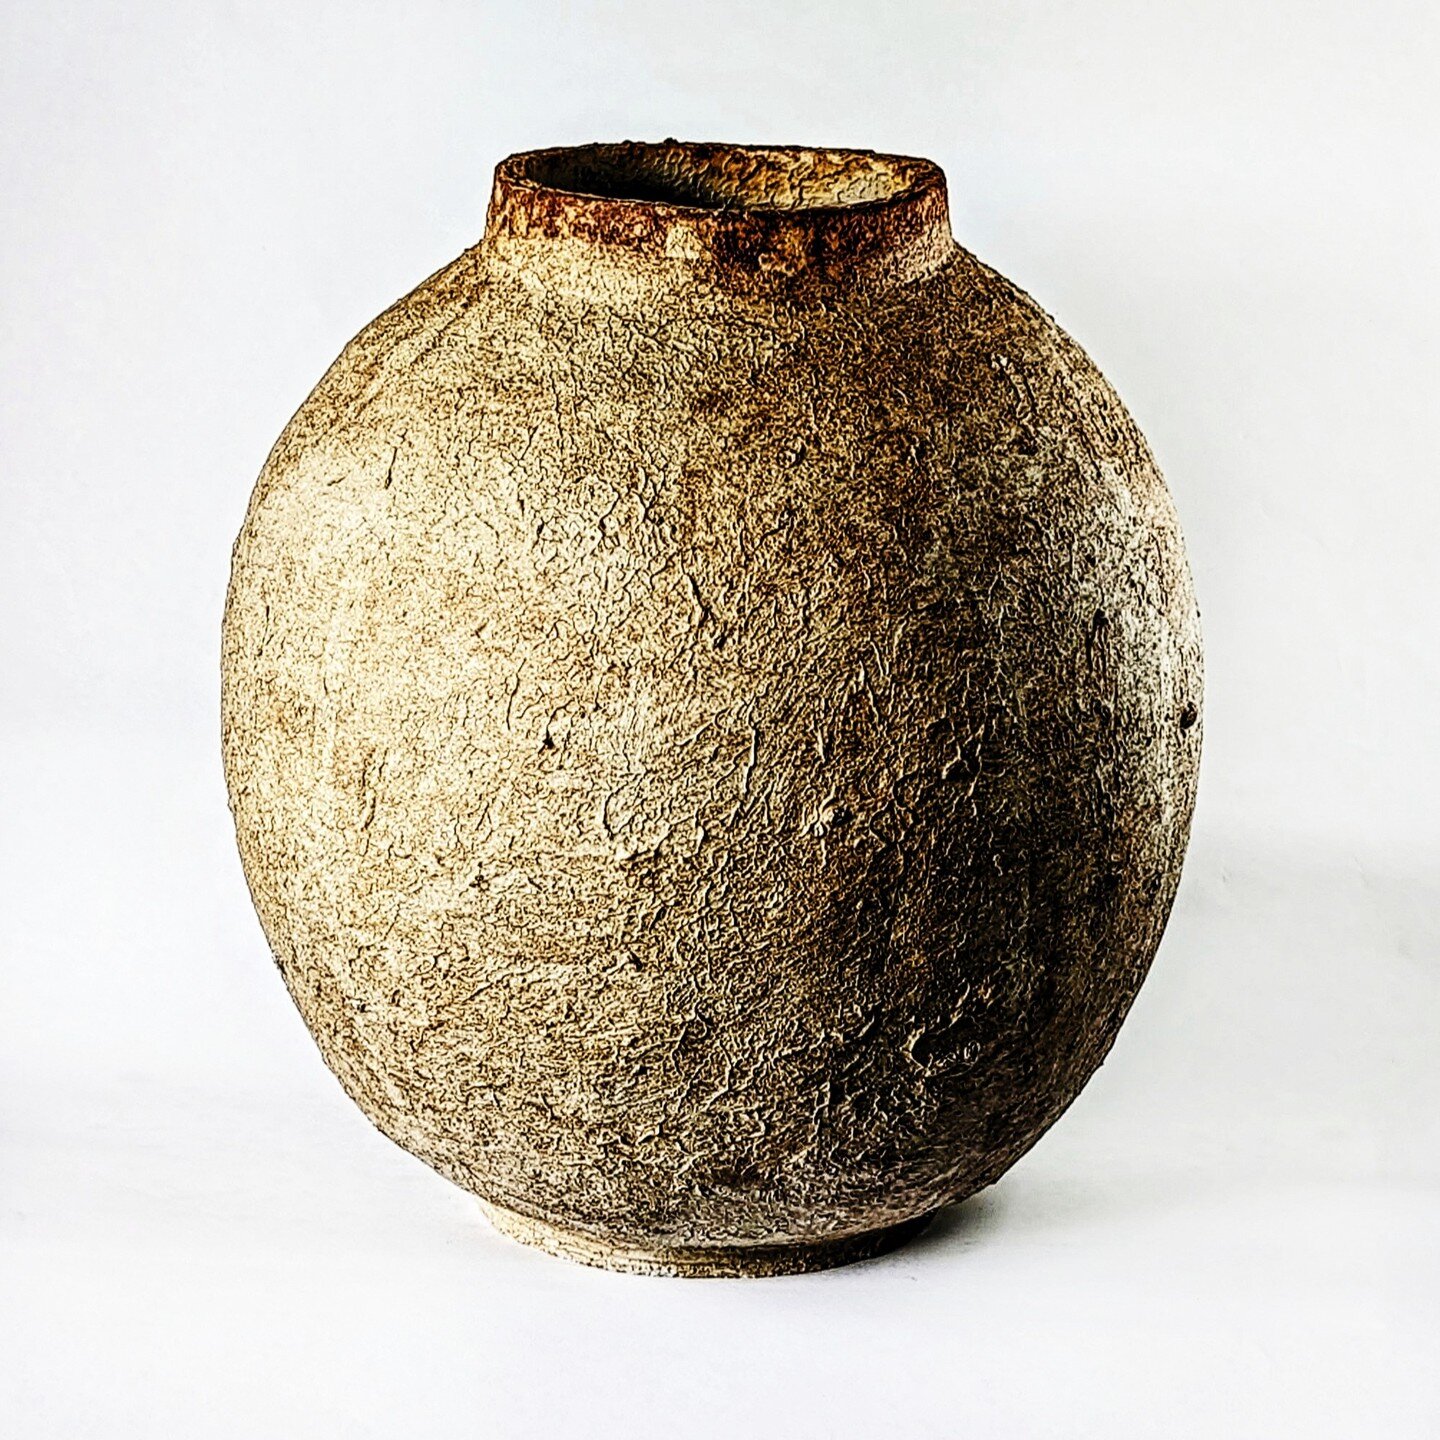 Something new&hellip;&hellip;&hellip;&hellip;..

Those who have been following along for a while will know that this &lsquo;almost&rsquo; moon jar is significant.

It&rsquo;s round! I&rsquo;m not at all accustomed to too many curved surfaces.

This (